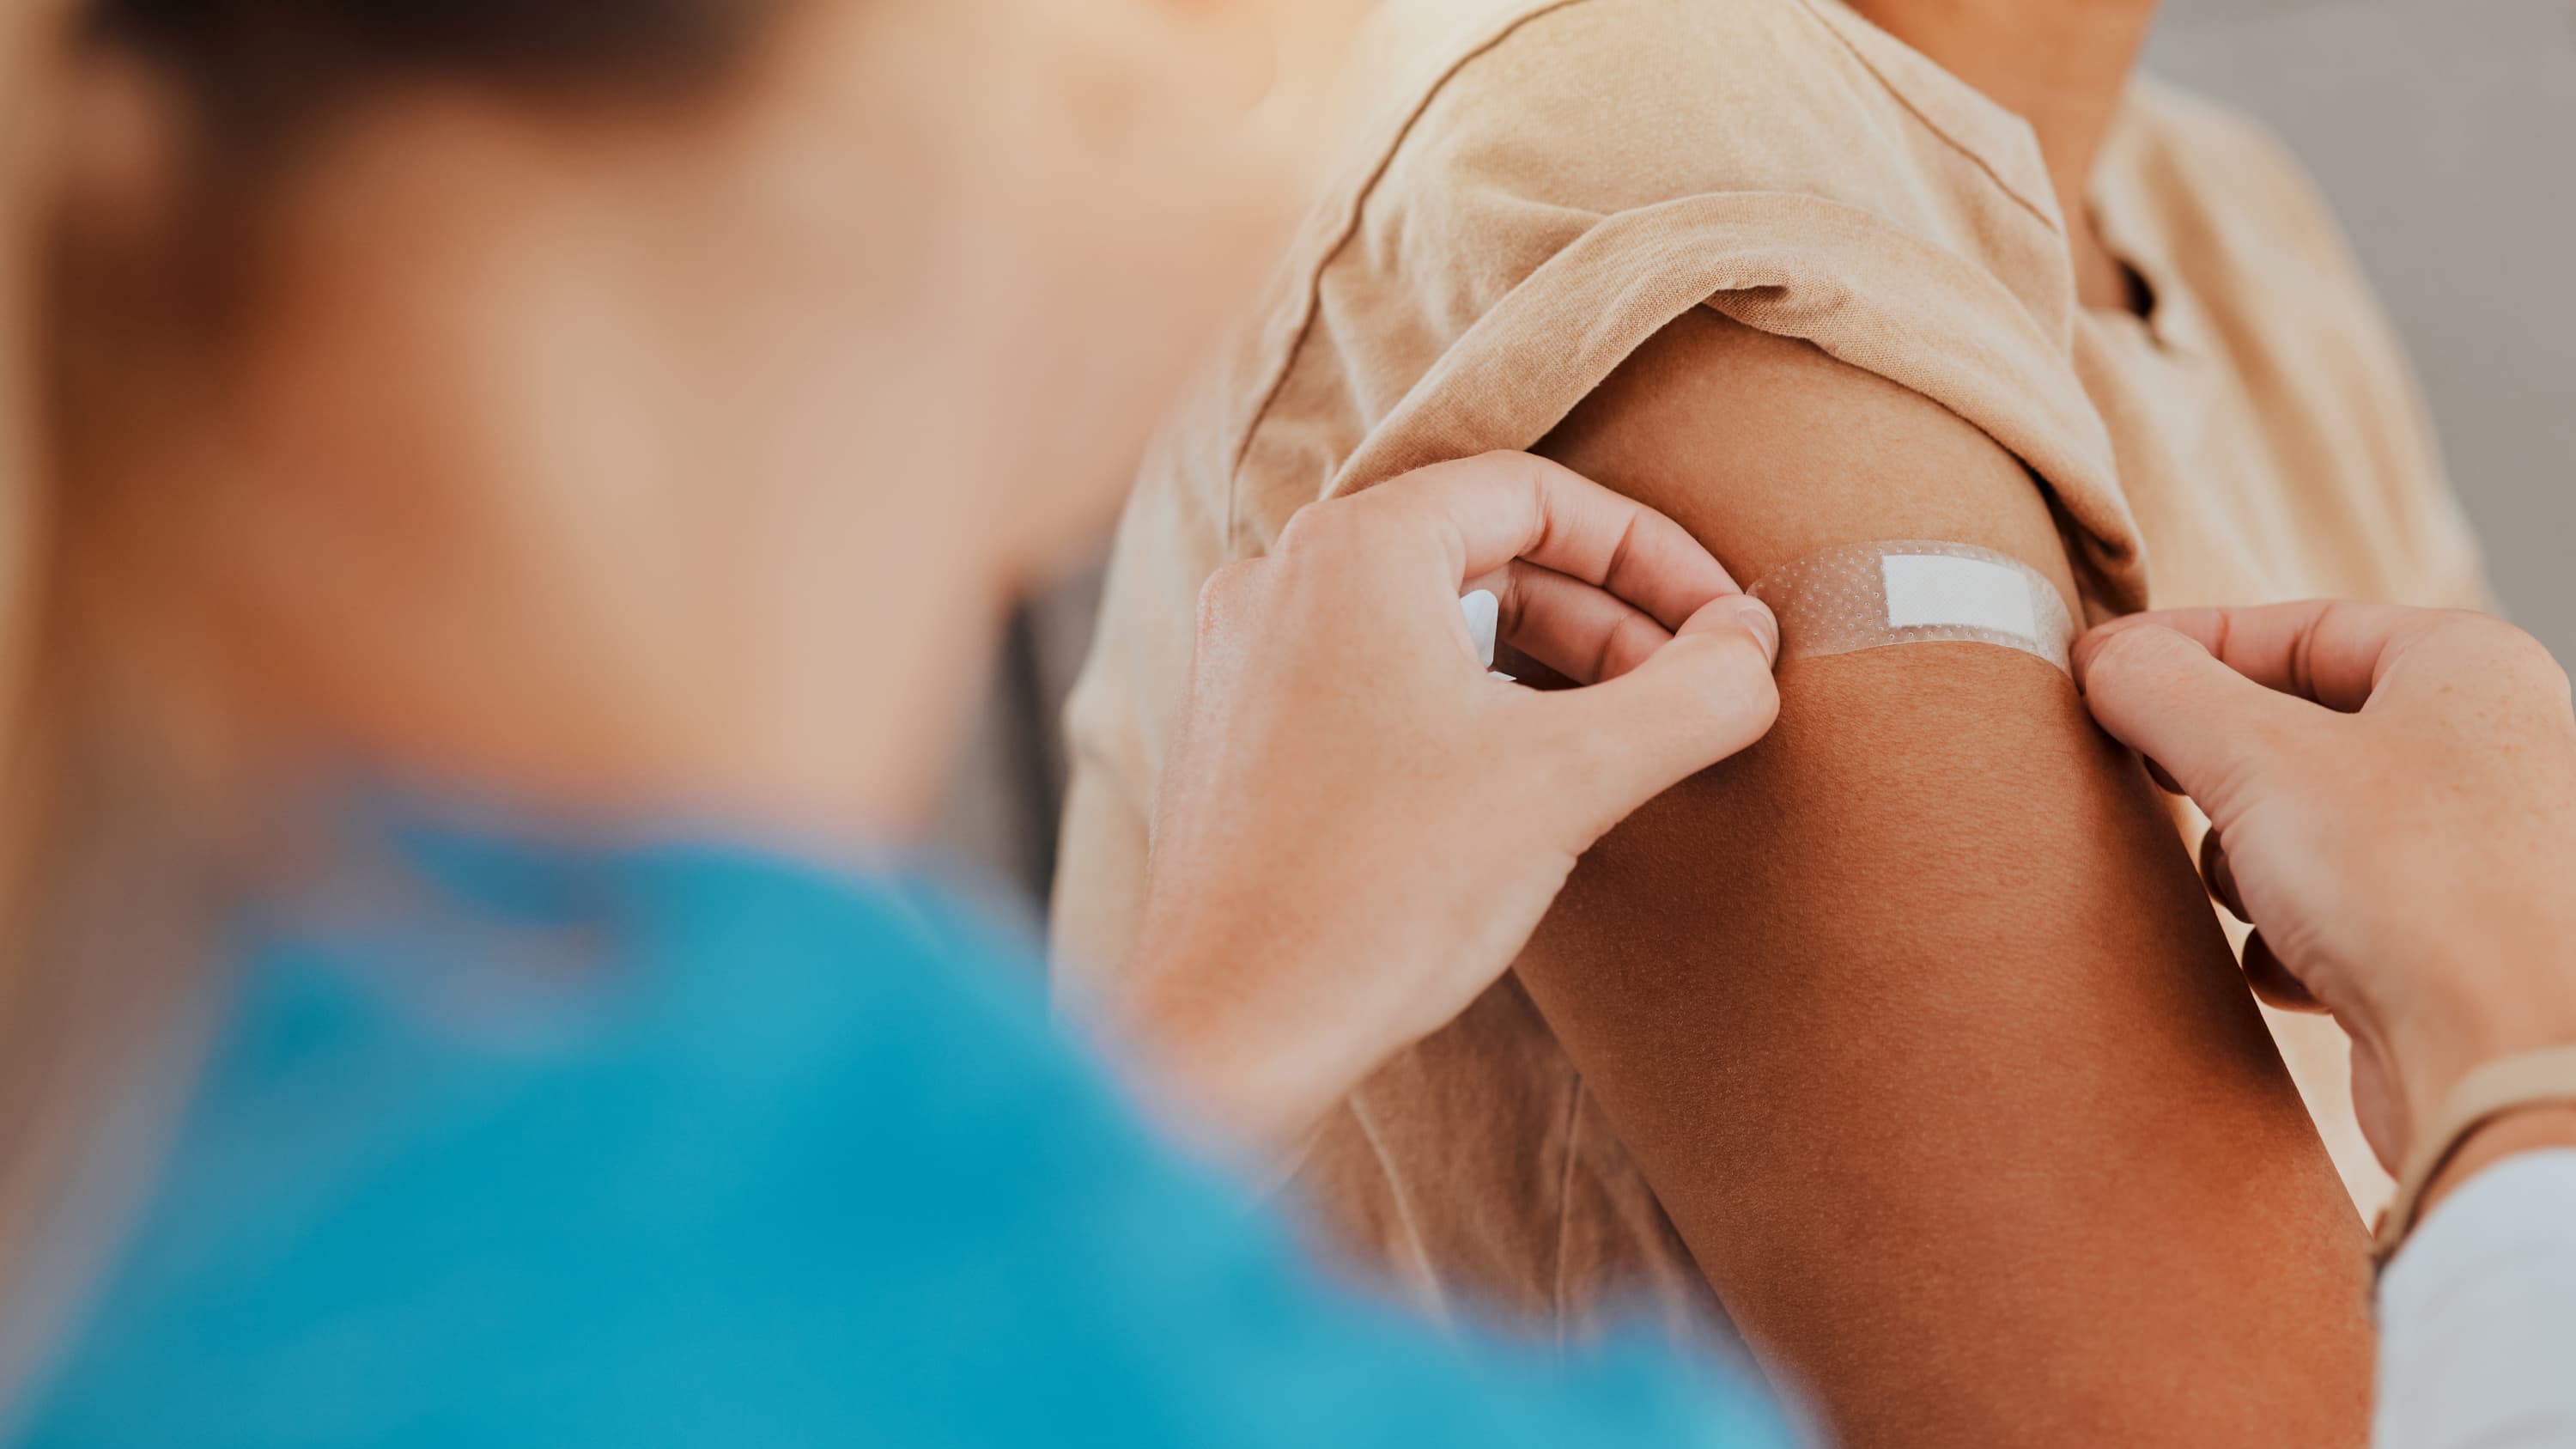 woman receiving a vaccine to protect against rsv, COVID, or flu